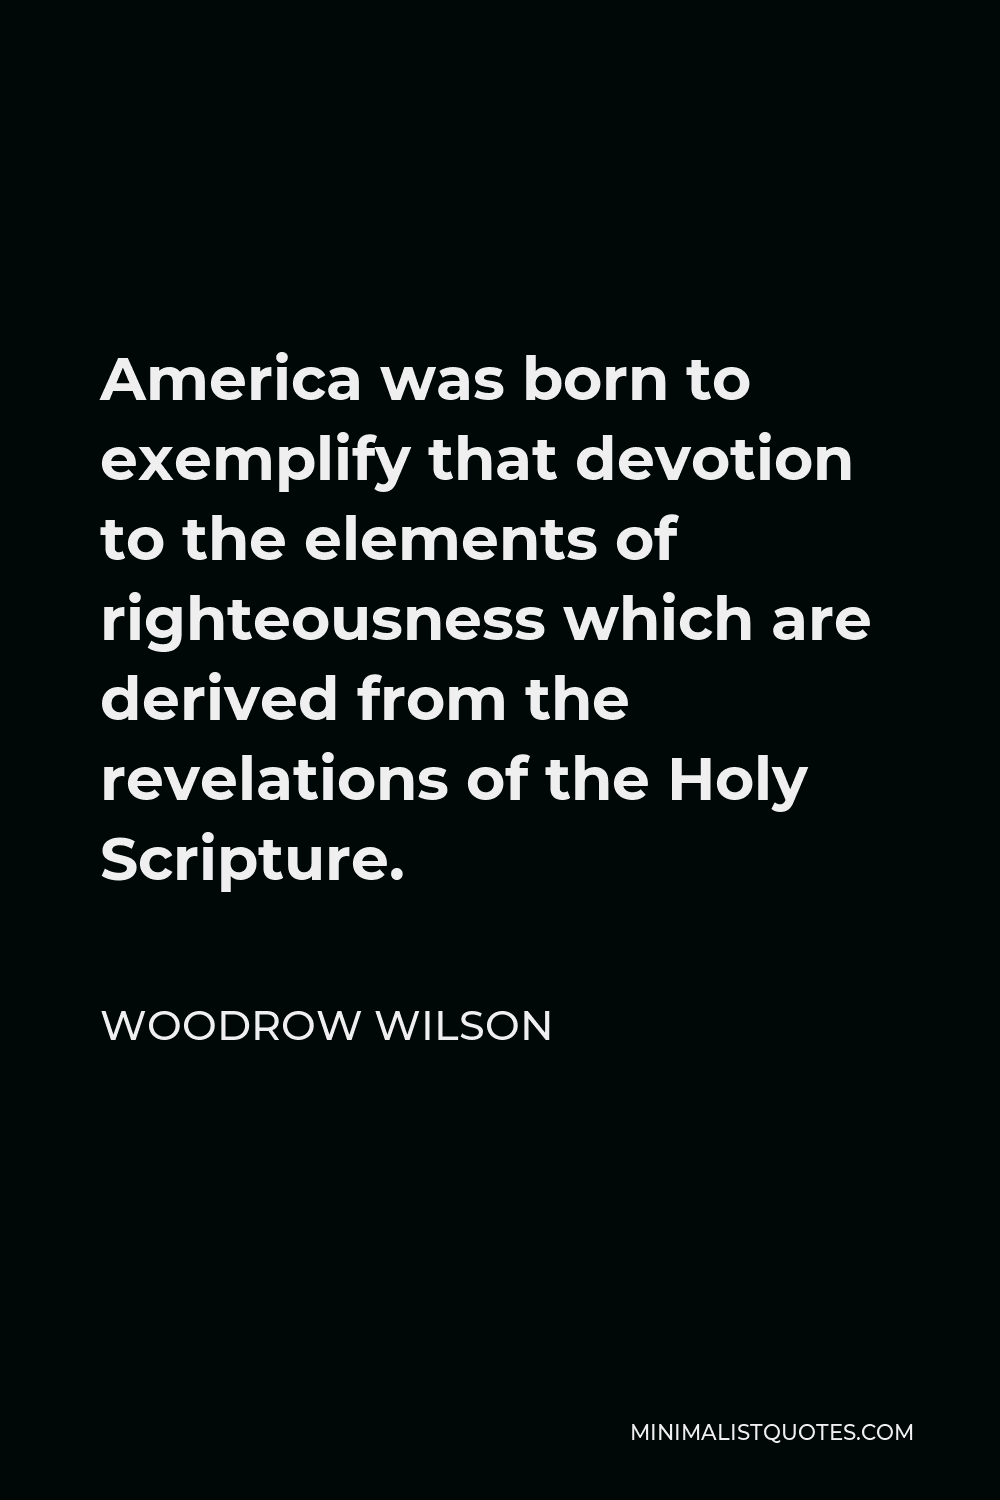 Woodrow Wilson Quote - America was born to exemplify that devotion to the elements of righteousness which are derived from the revelations of the Holy Scripture.